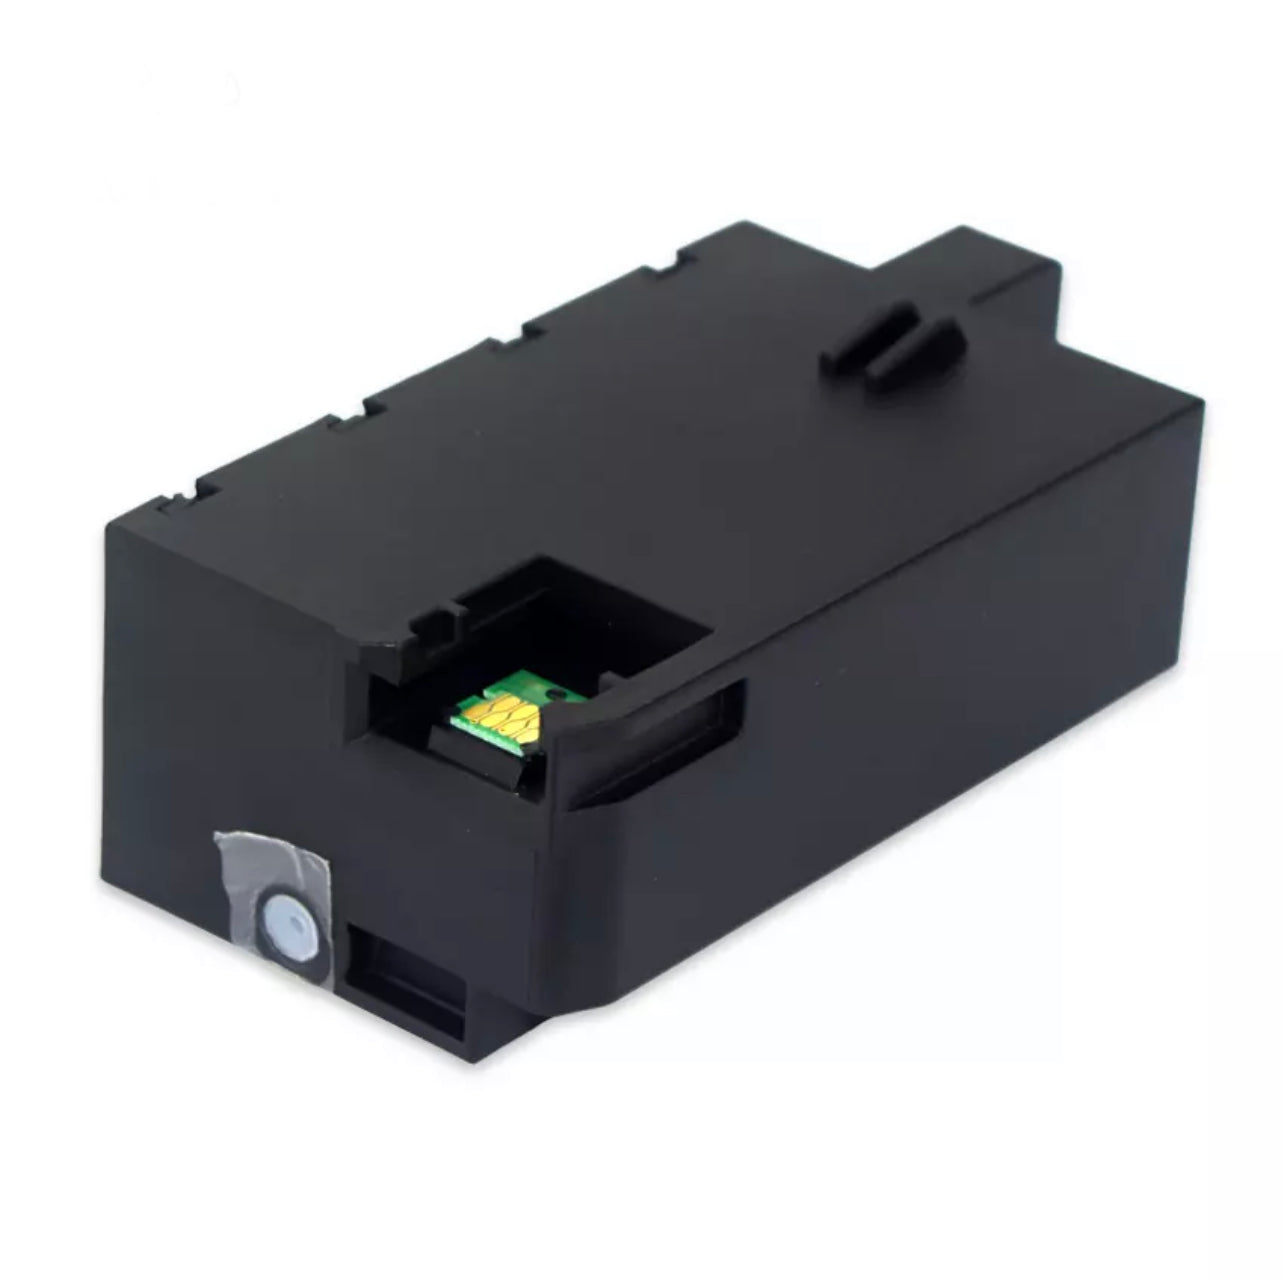 T3661 T3661C E3661 Waste Ink Tank Maintenance Box For Epson